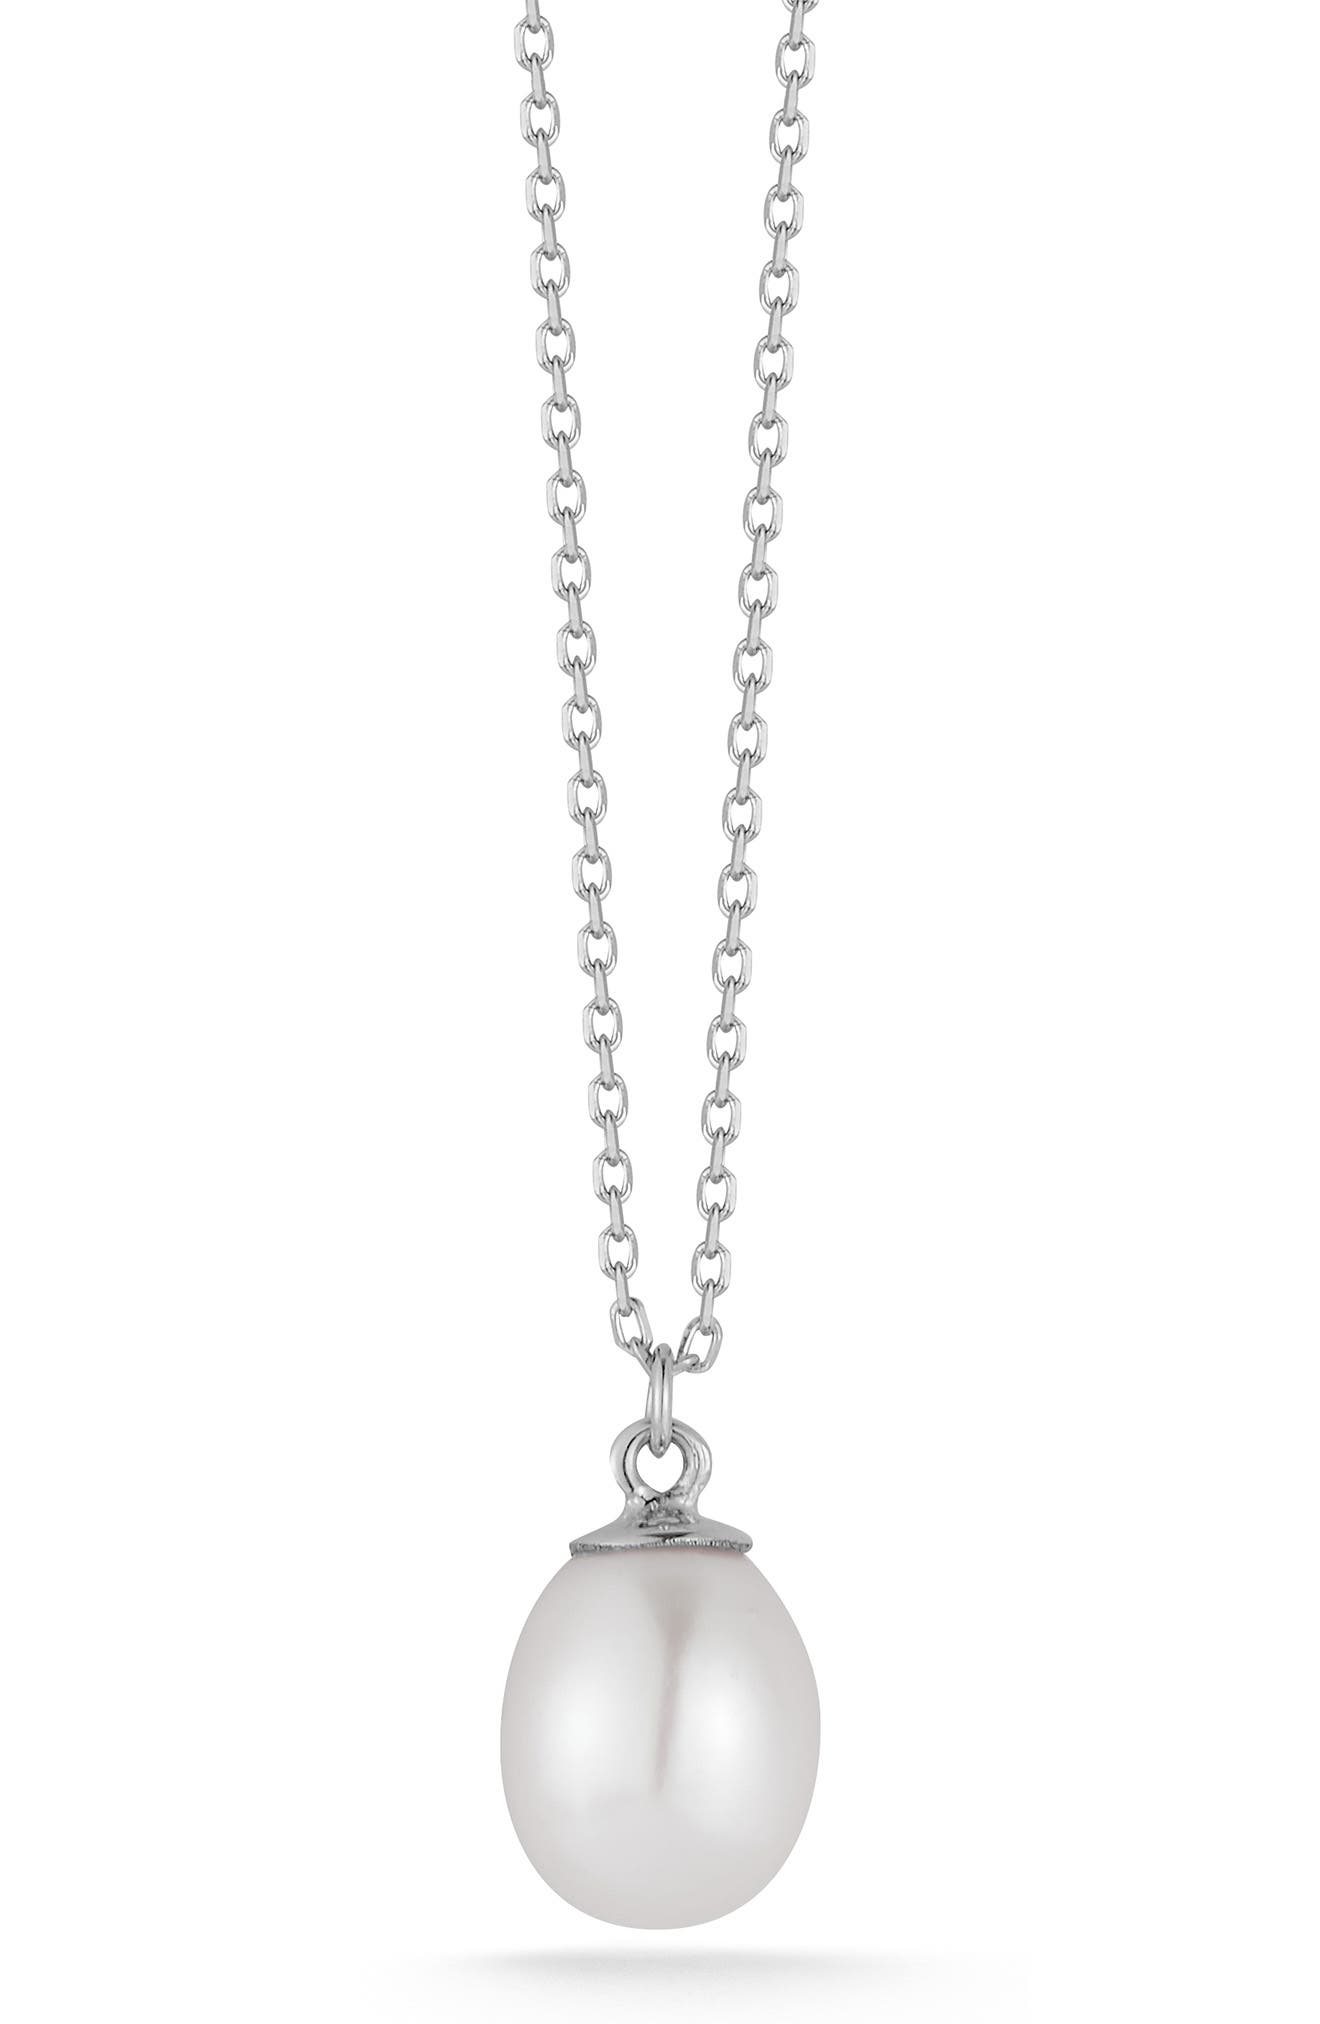 Sphera Milano 14k White Gold 8mm Freshwater Pearl Charm Necklace